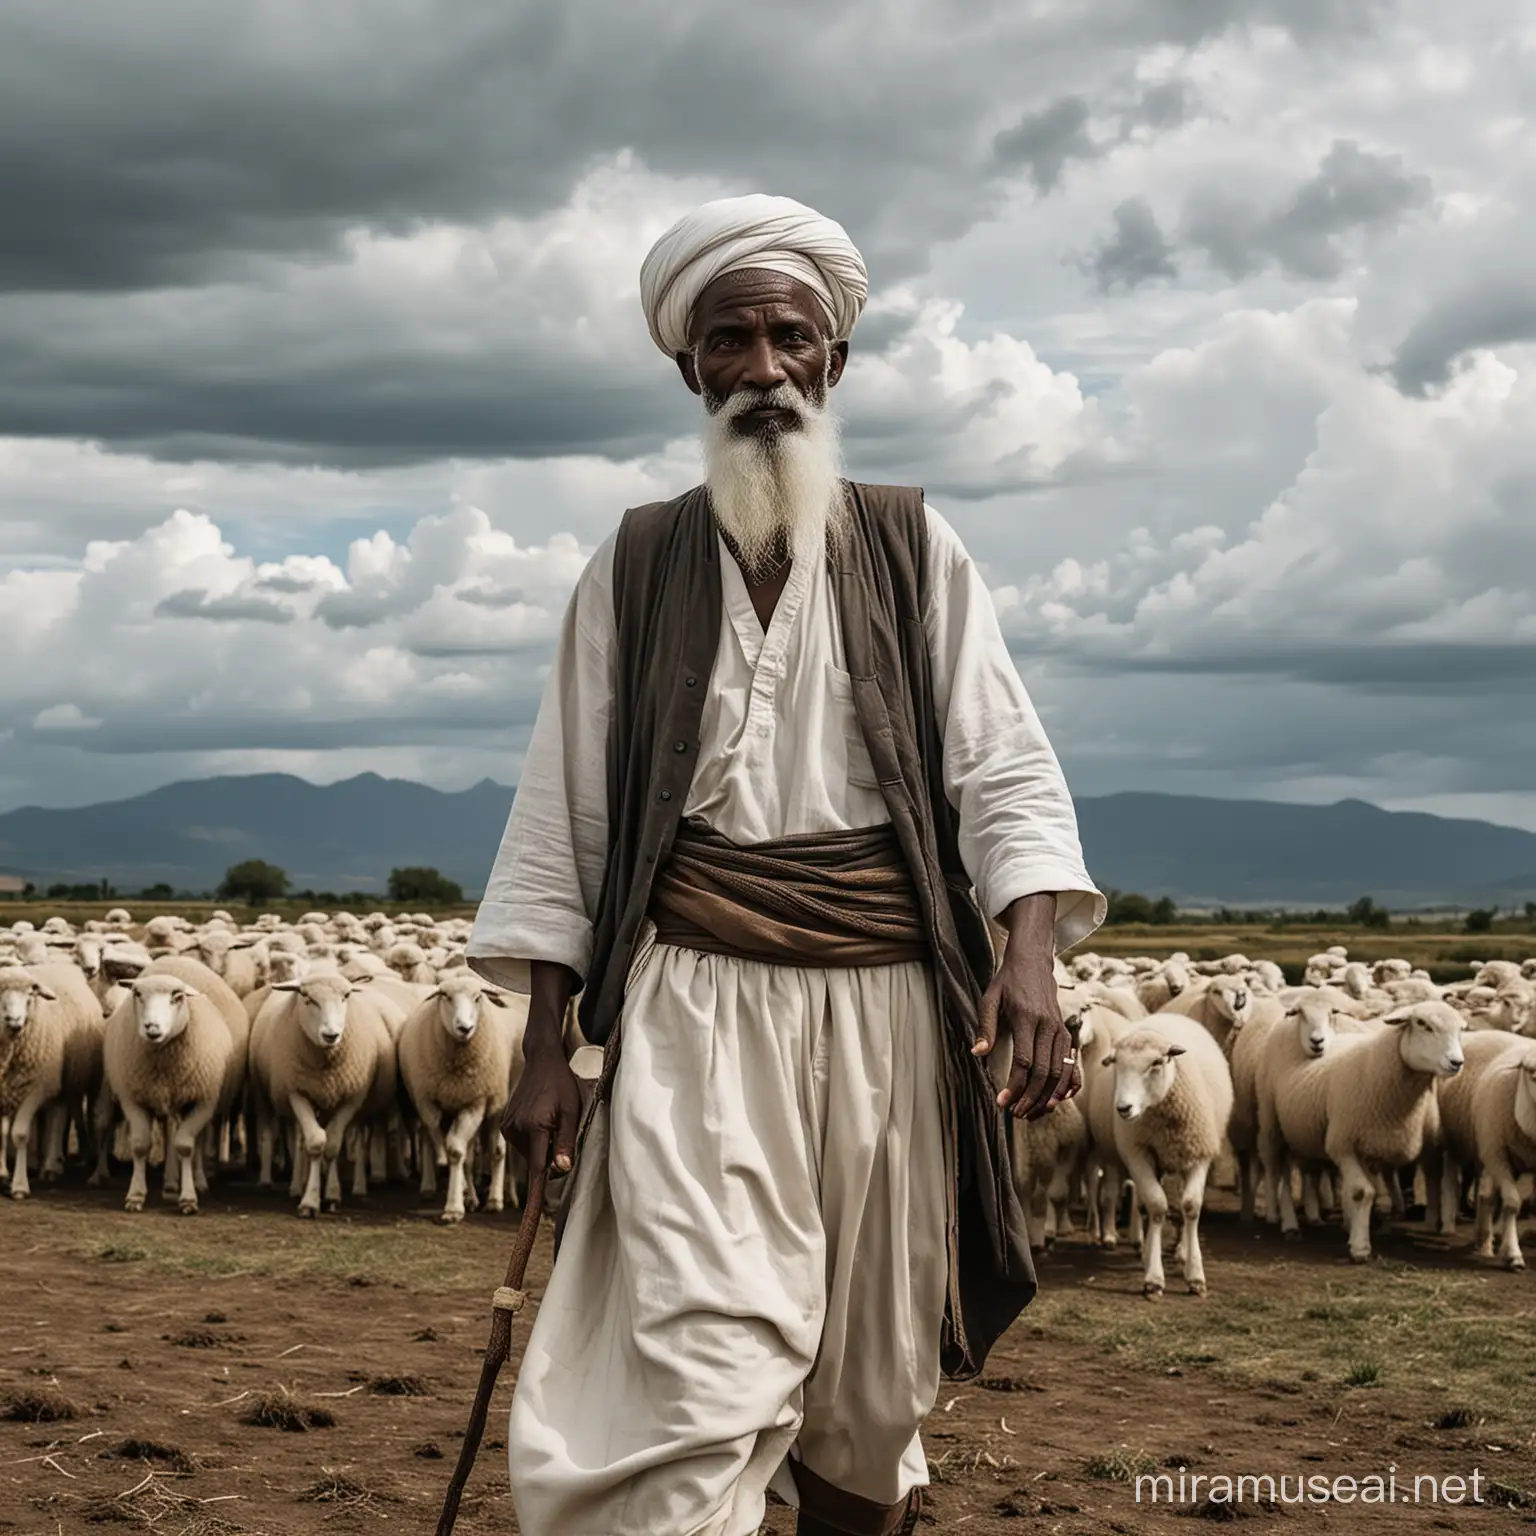 a skinny very dark black  nomad farmer 80 years white beard white turban   and moustache  and earrings  old clothing  total full body  background a few running sheeps cloudy sky  50 mmfuji xt3